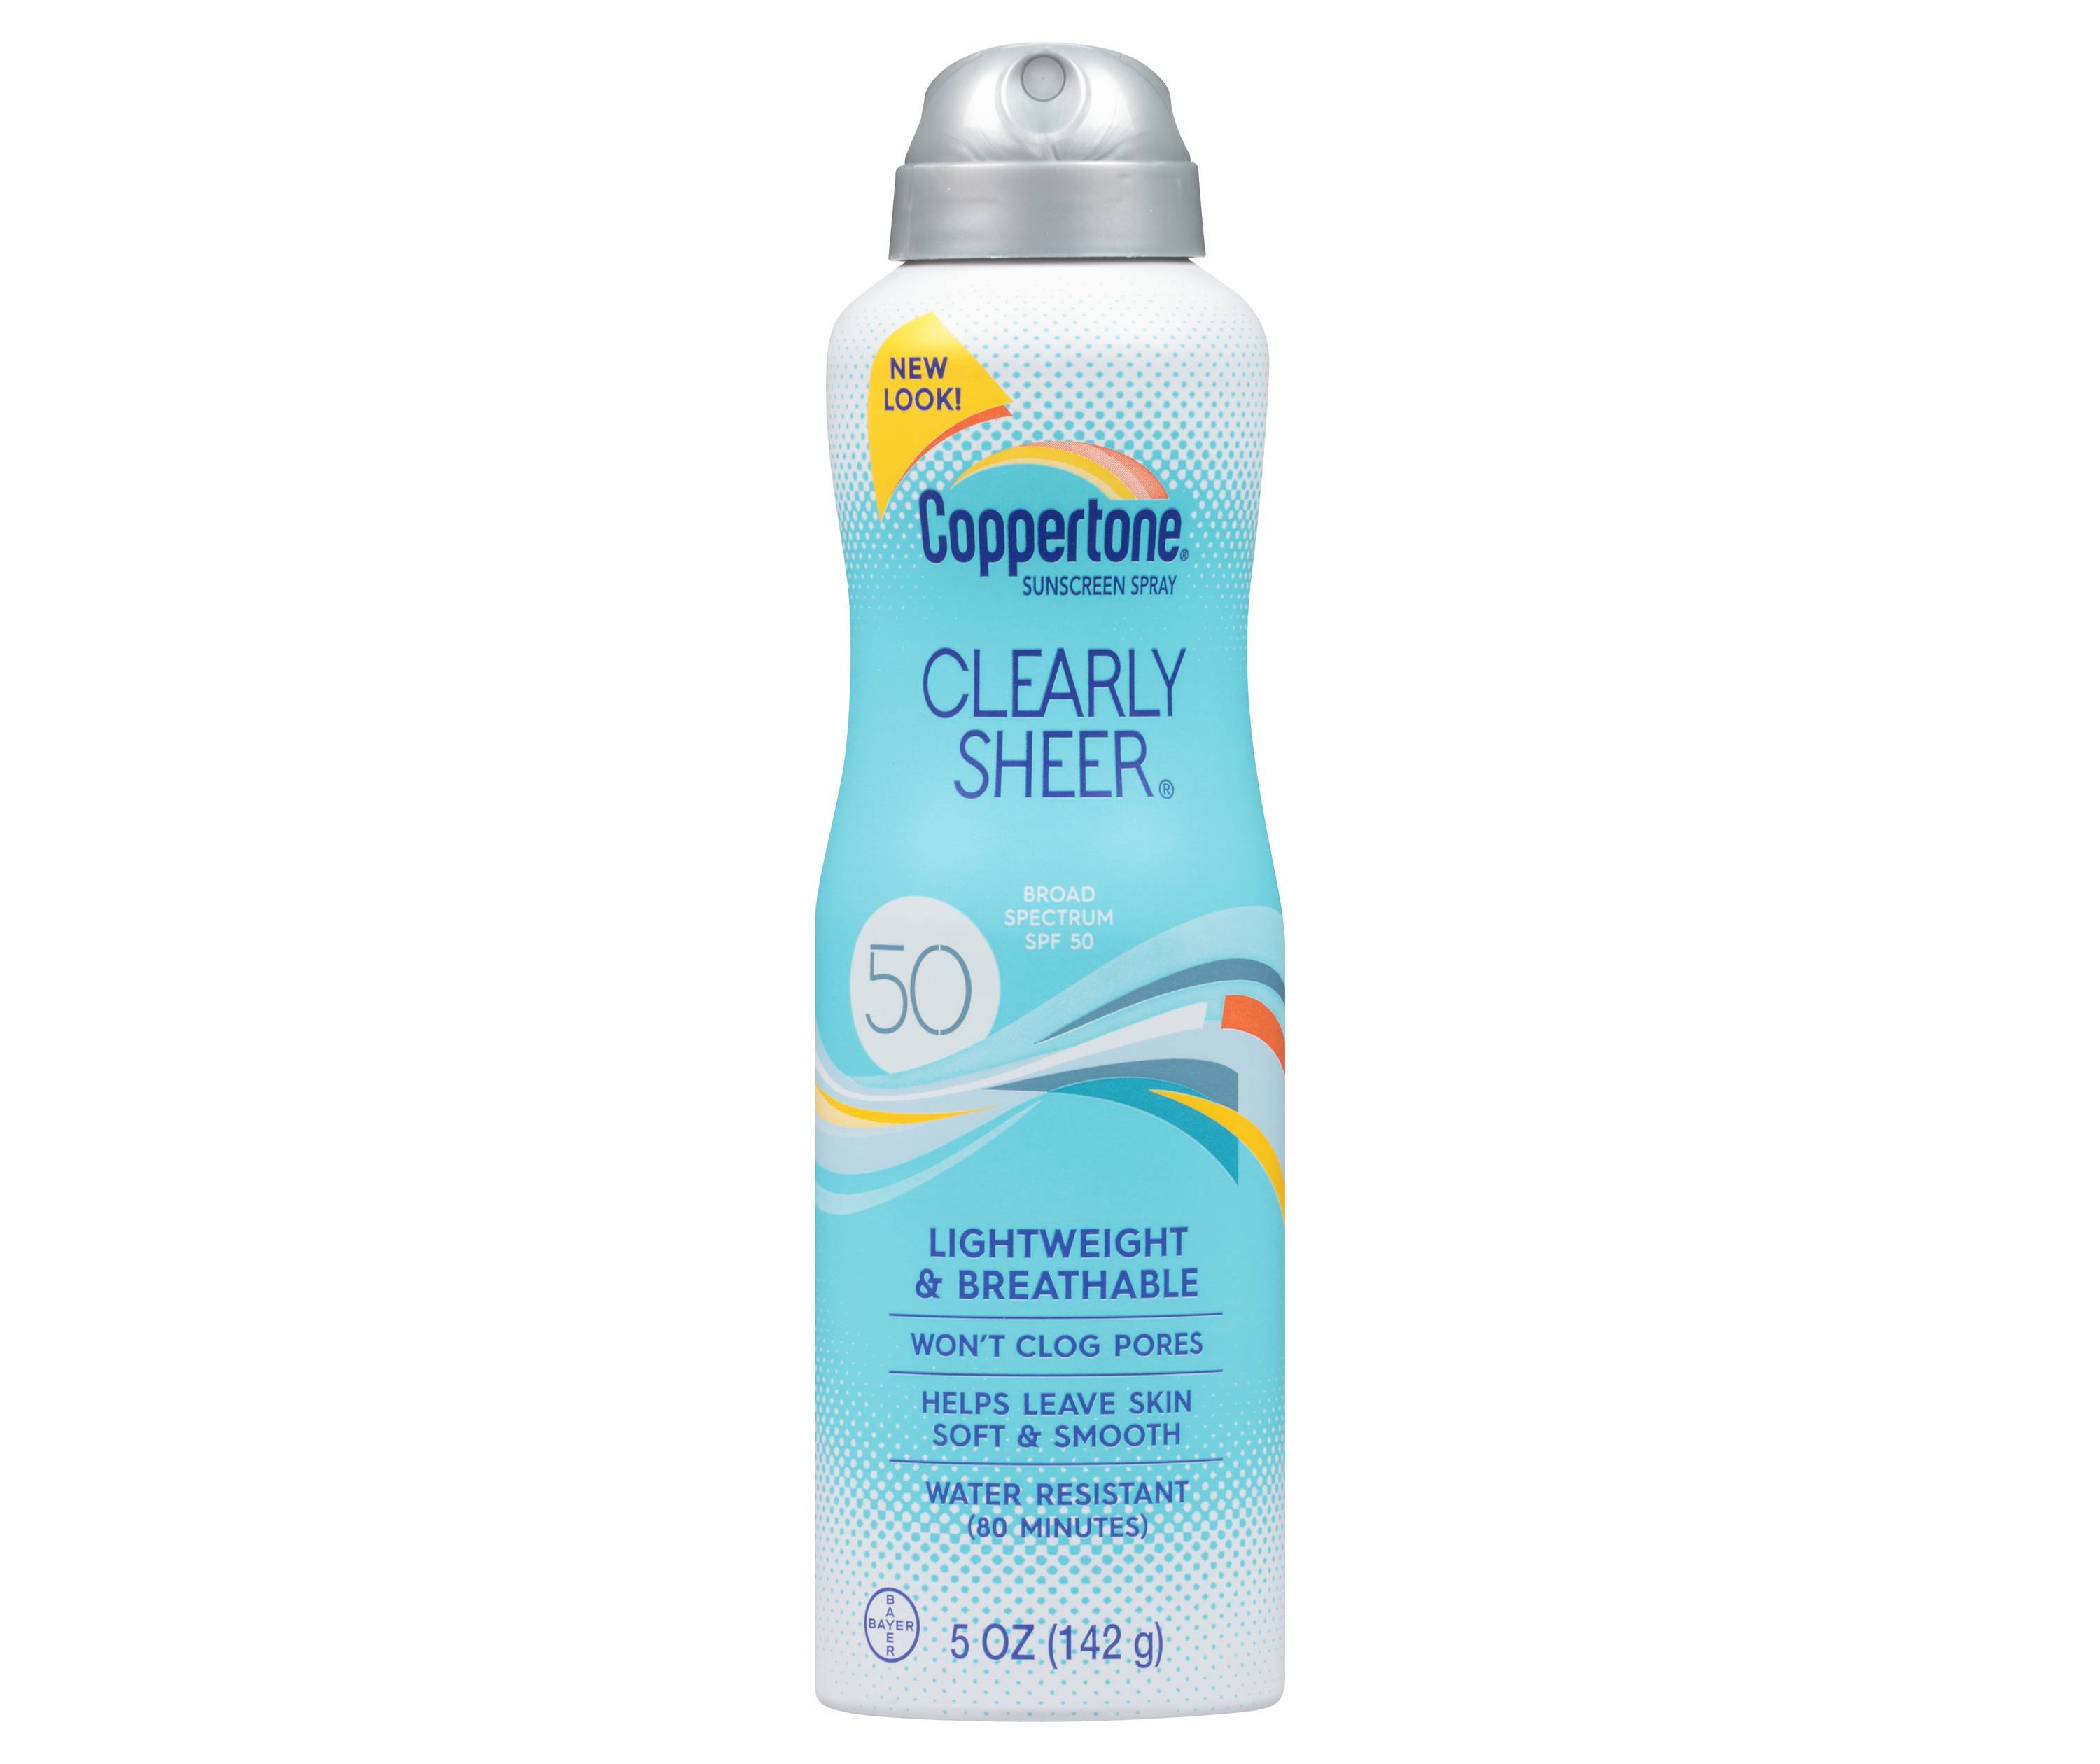 Coppertone Clearly Sheer C-Spray - SPF 50 Sunscreen